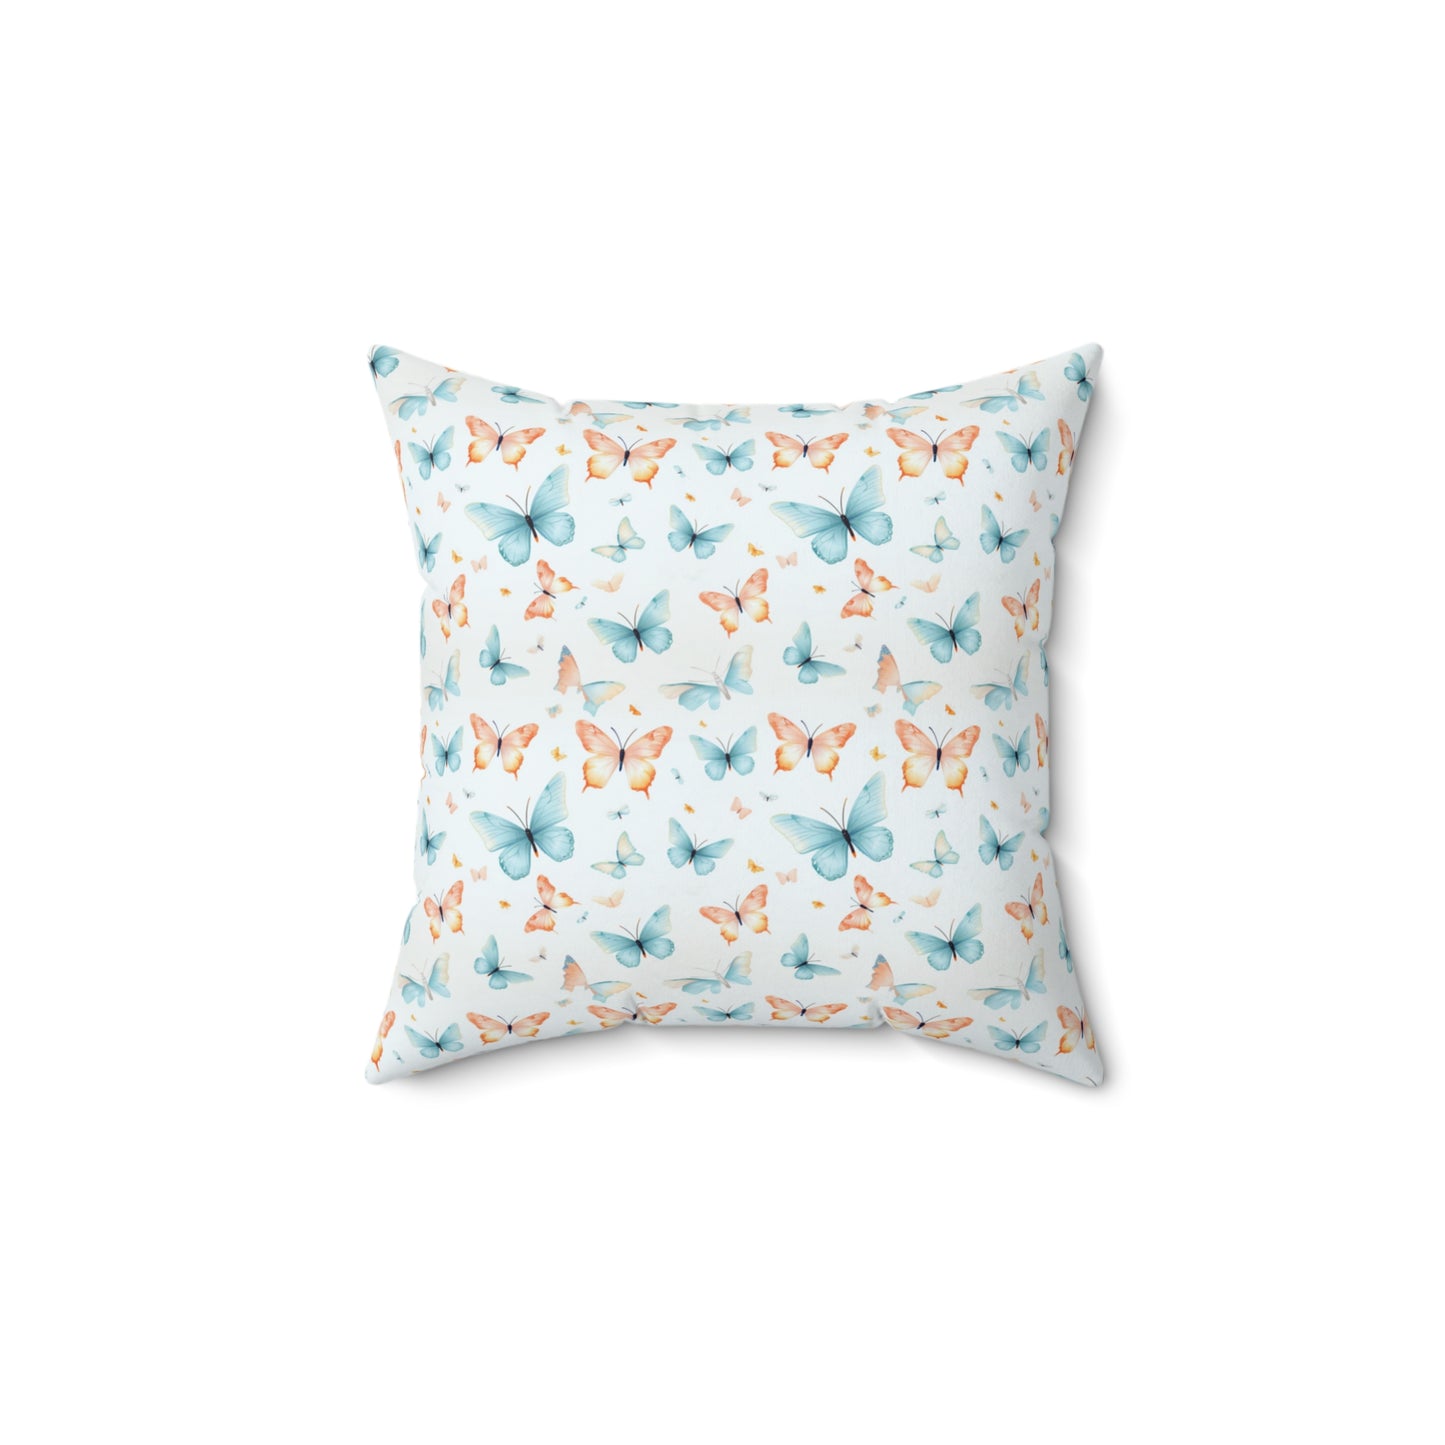 Butterfly Pillow: Conakry